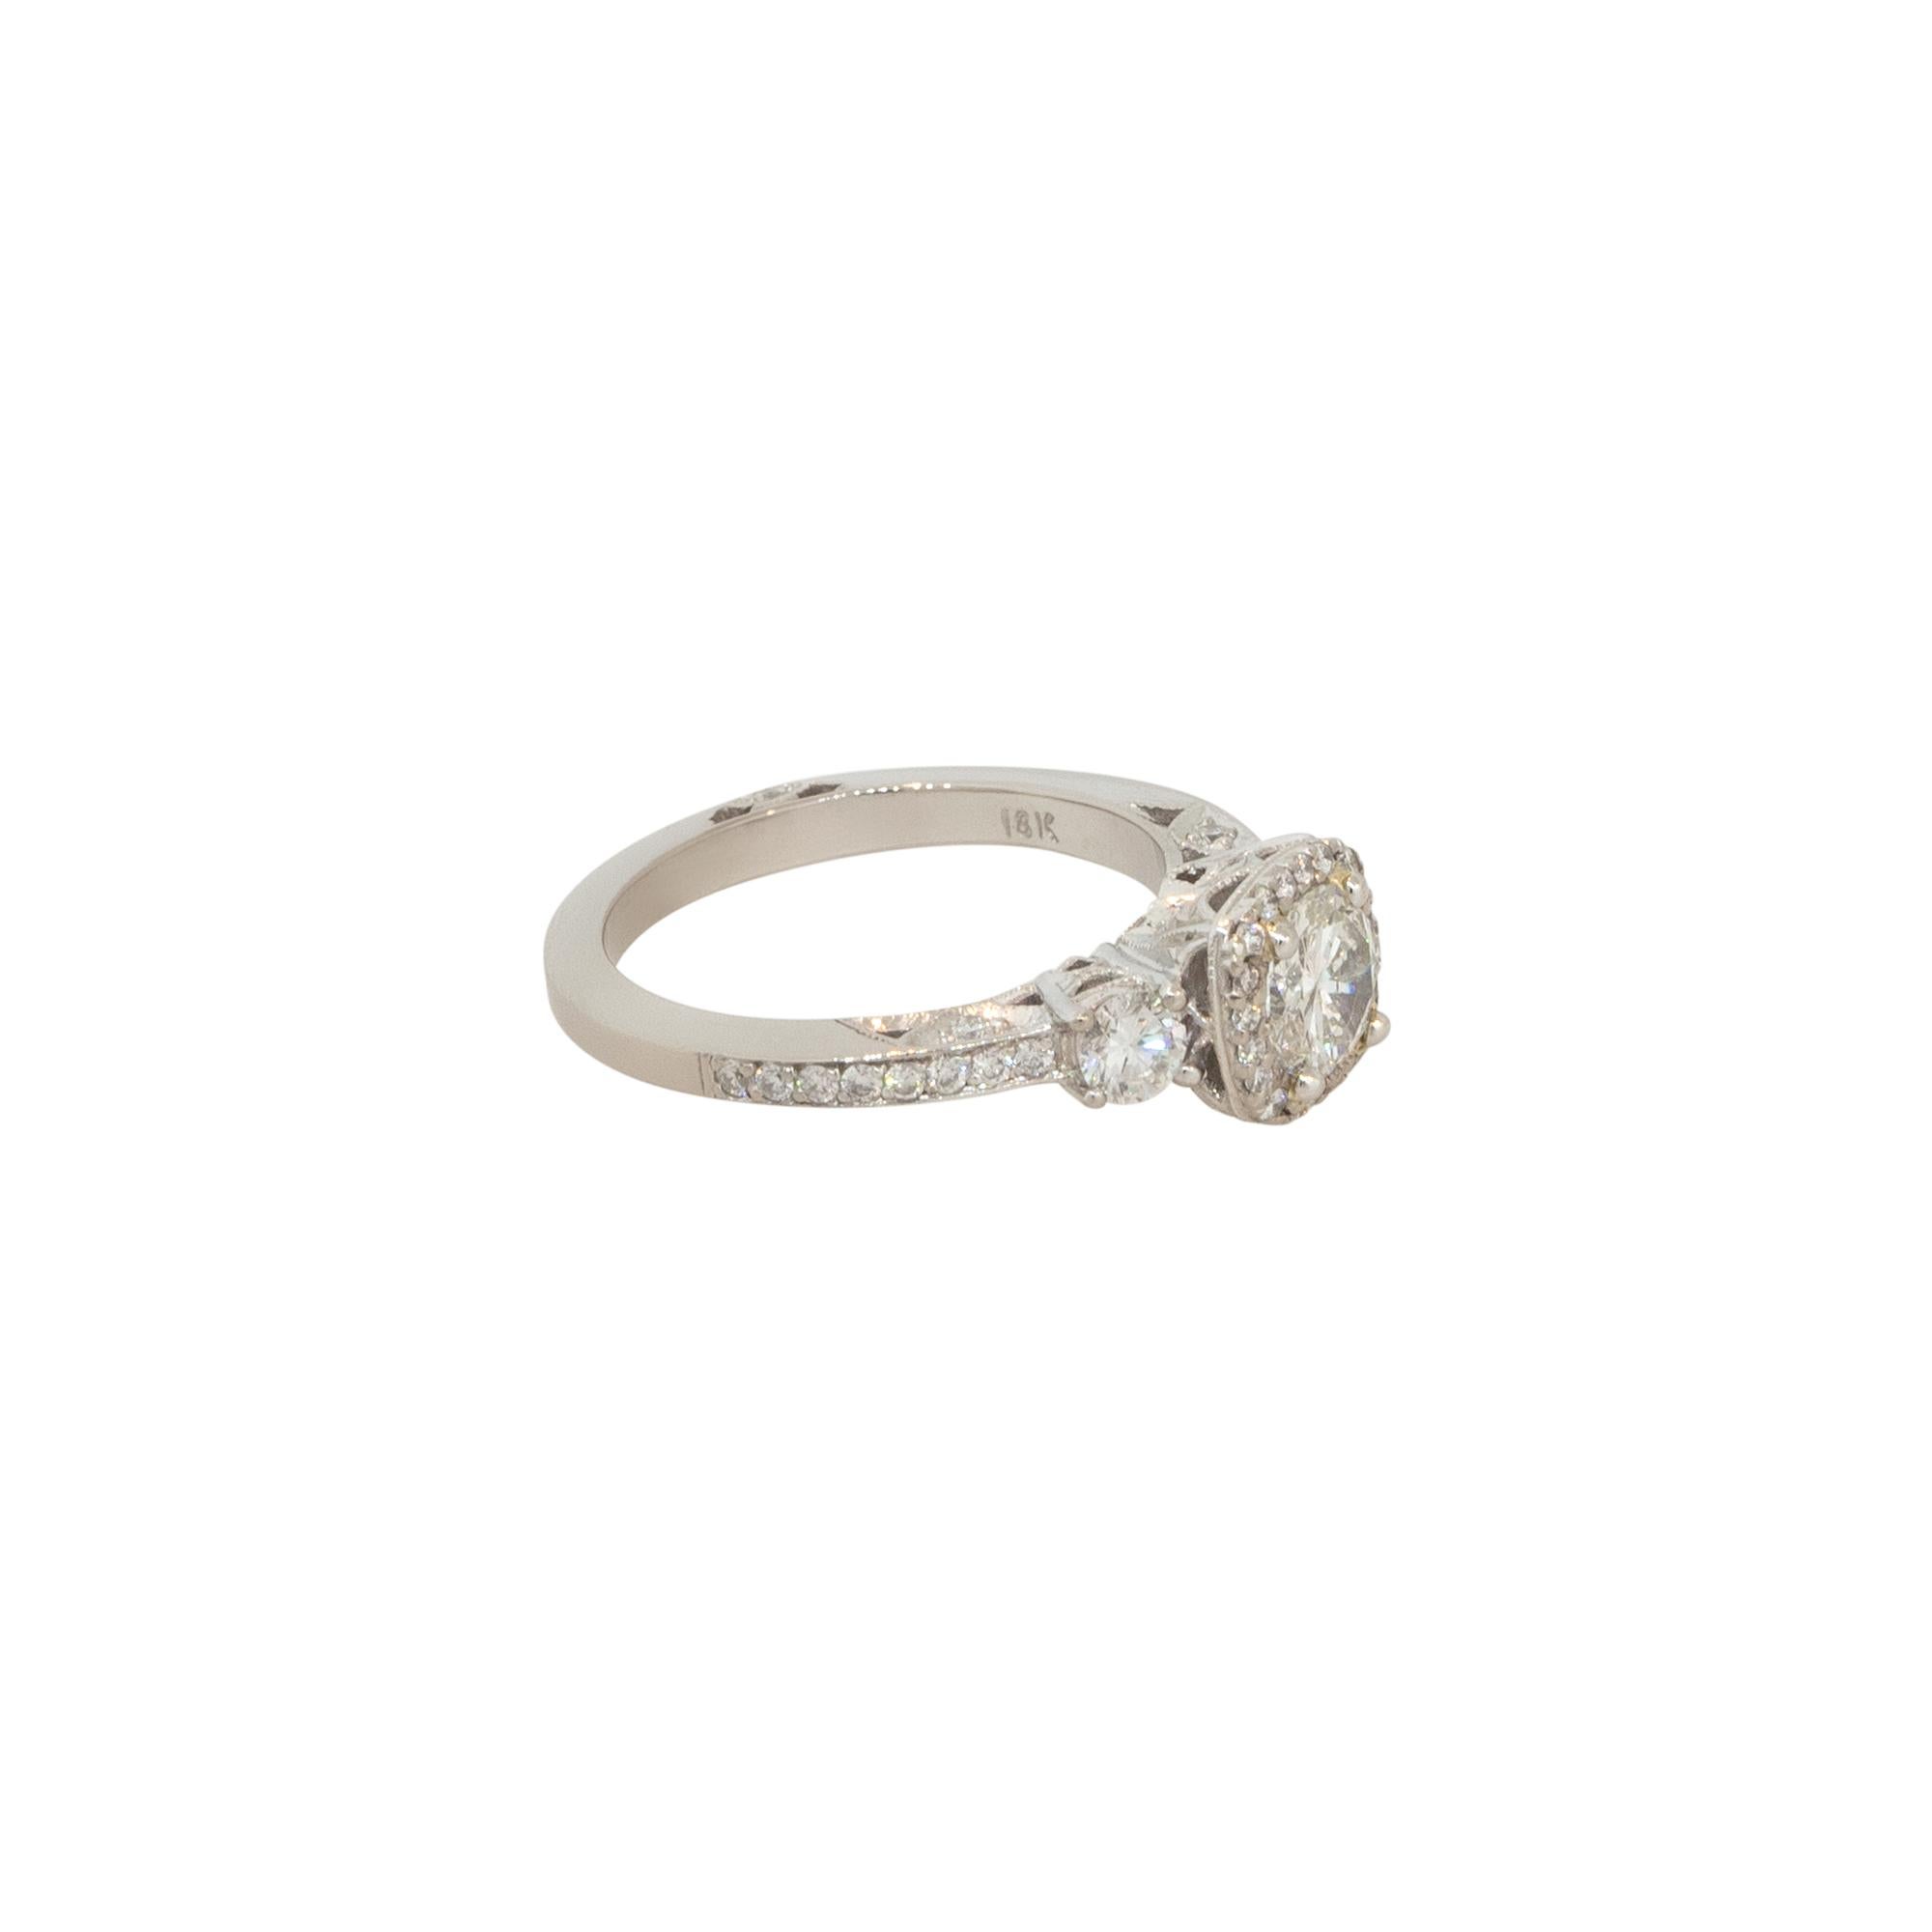 18k White Gold 1.04ctw Round Diamond 3 Stone Halo Engagement Ring

Raymond Lee Jewelers in Boca Raton -- South Florida’s destination for diamonds, fine jewelry, antique jewelry, estate pieces, and vintage jewels.

This Tacori diamond engagement ring